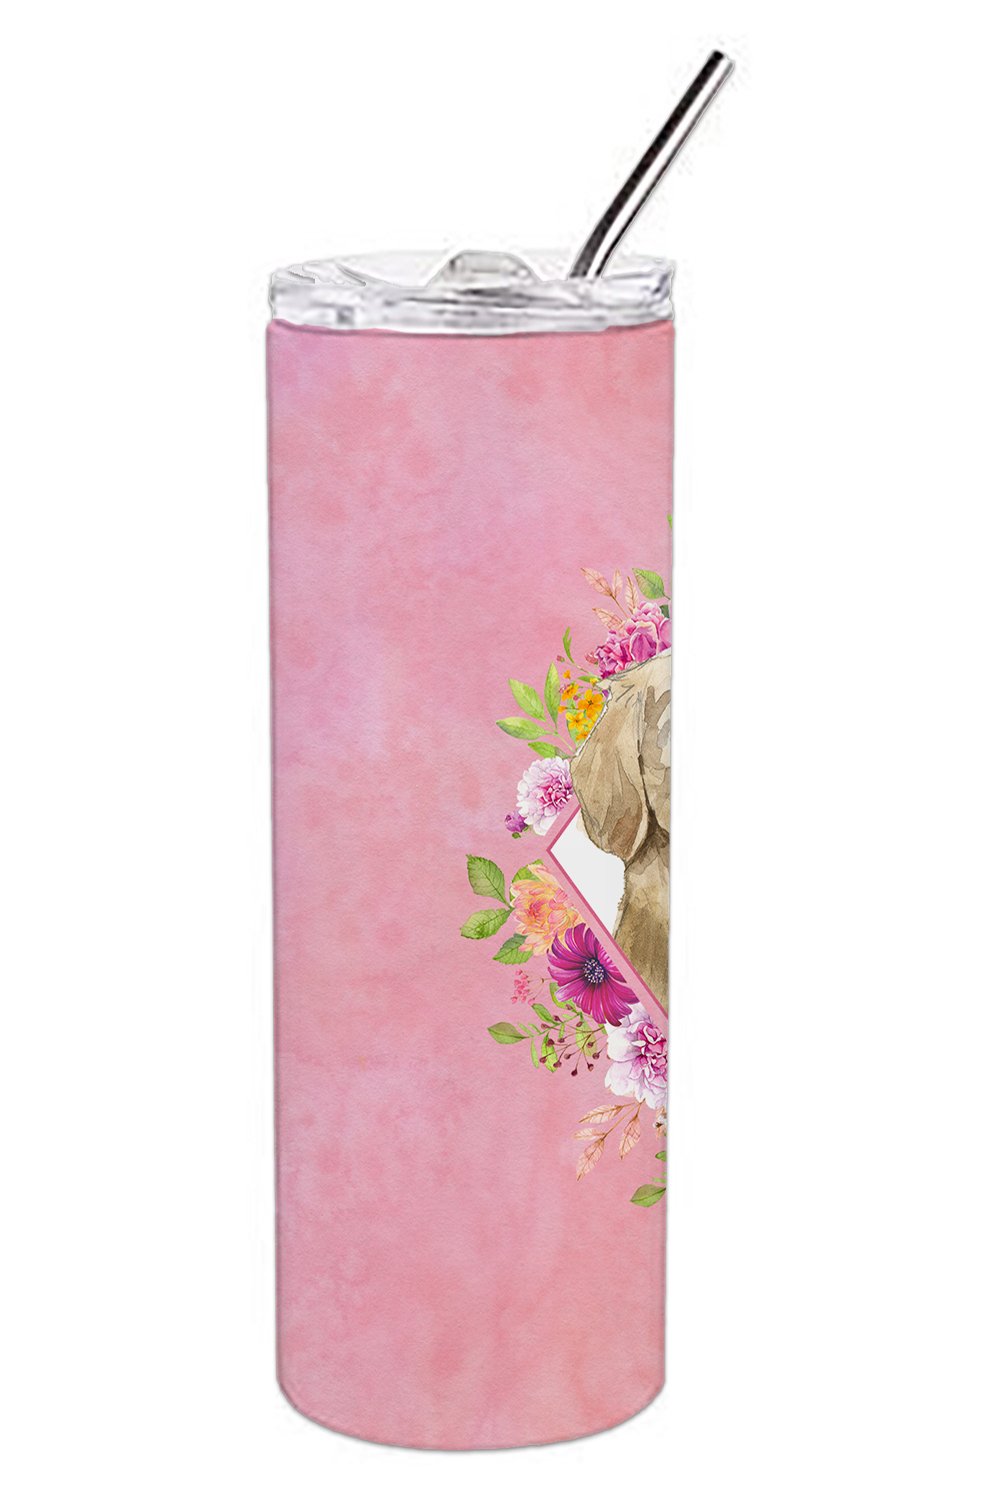 Golden Retriever Pink Flowers Double Walled Stainless Steel 20 oz Skinny Tumbler CK4235TBL20 by Caroline's Treasures